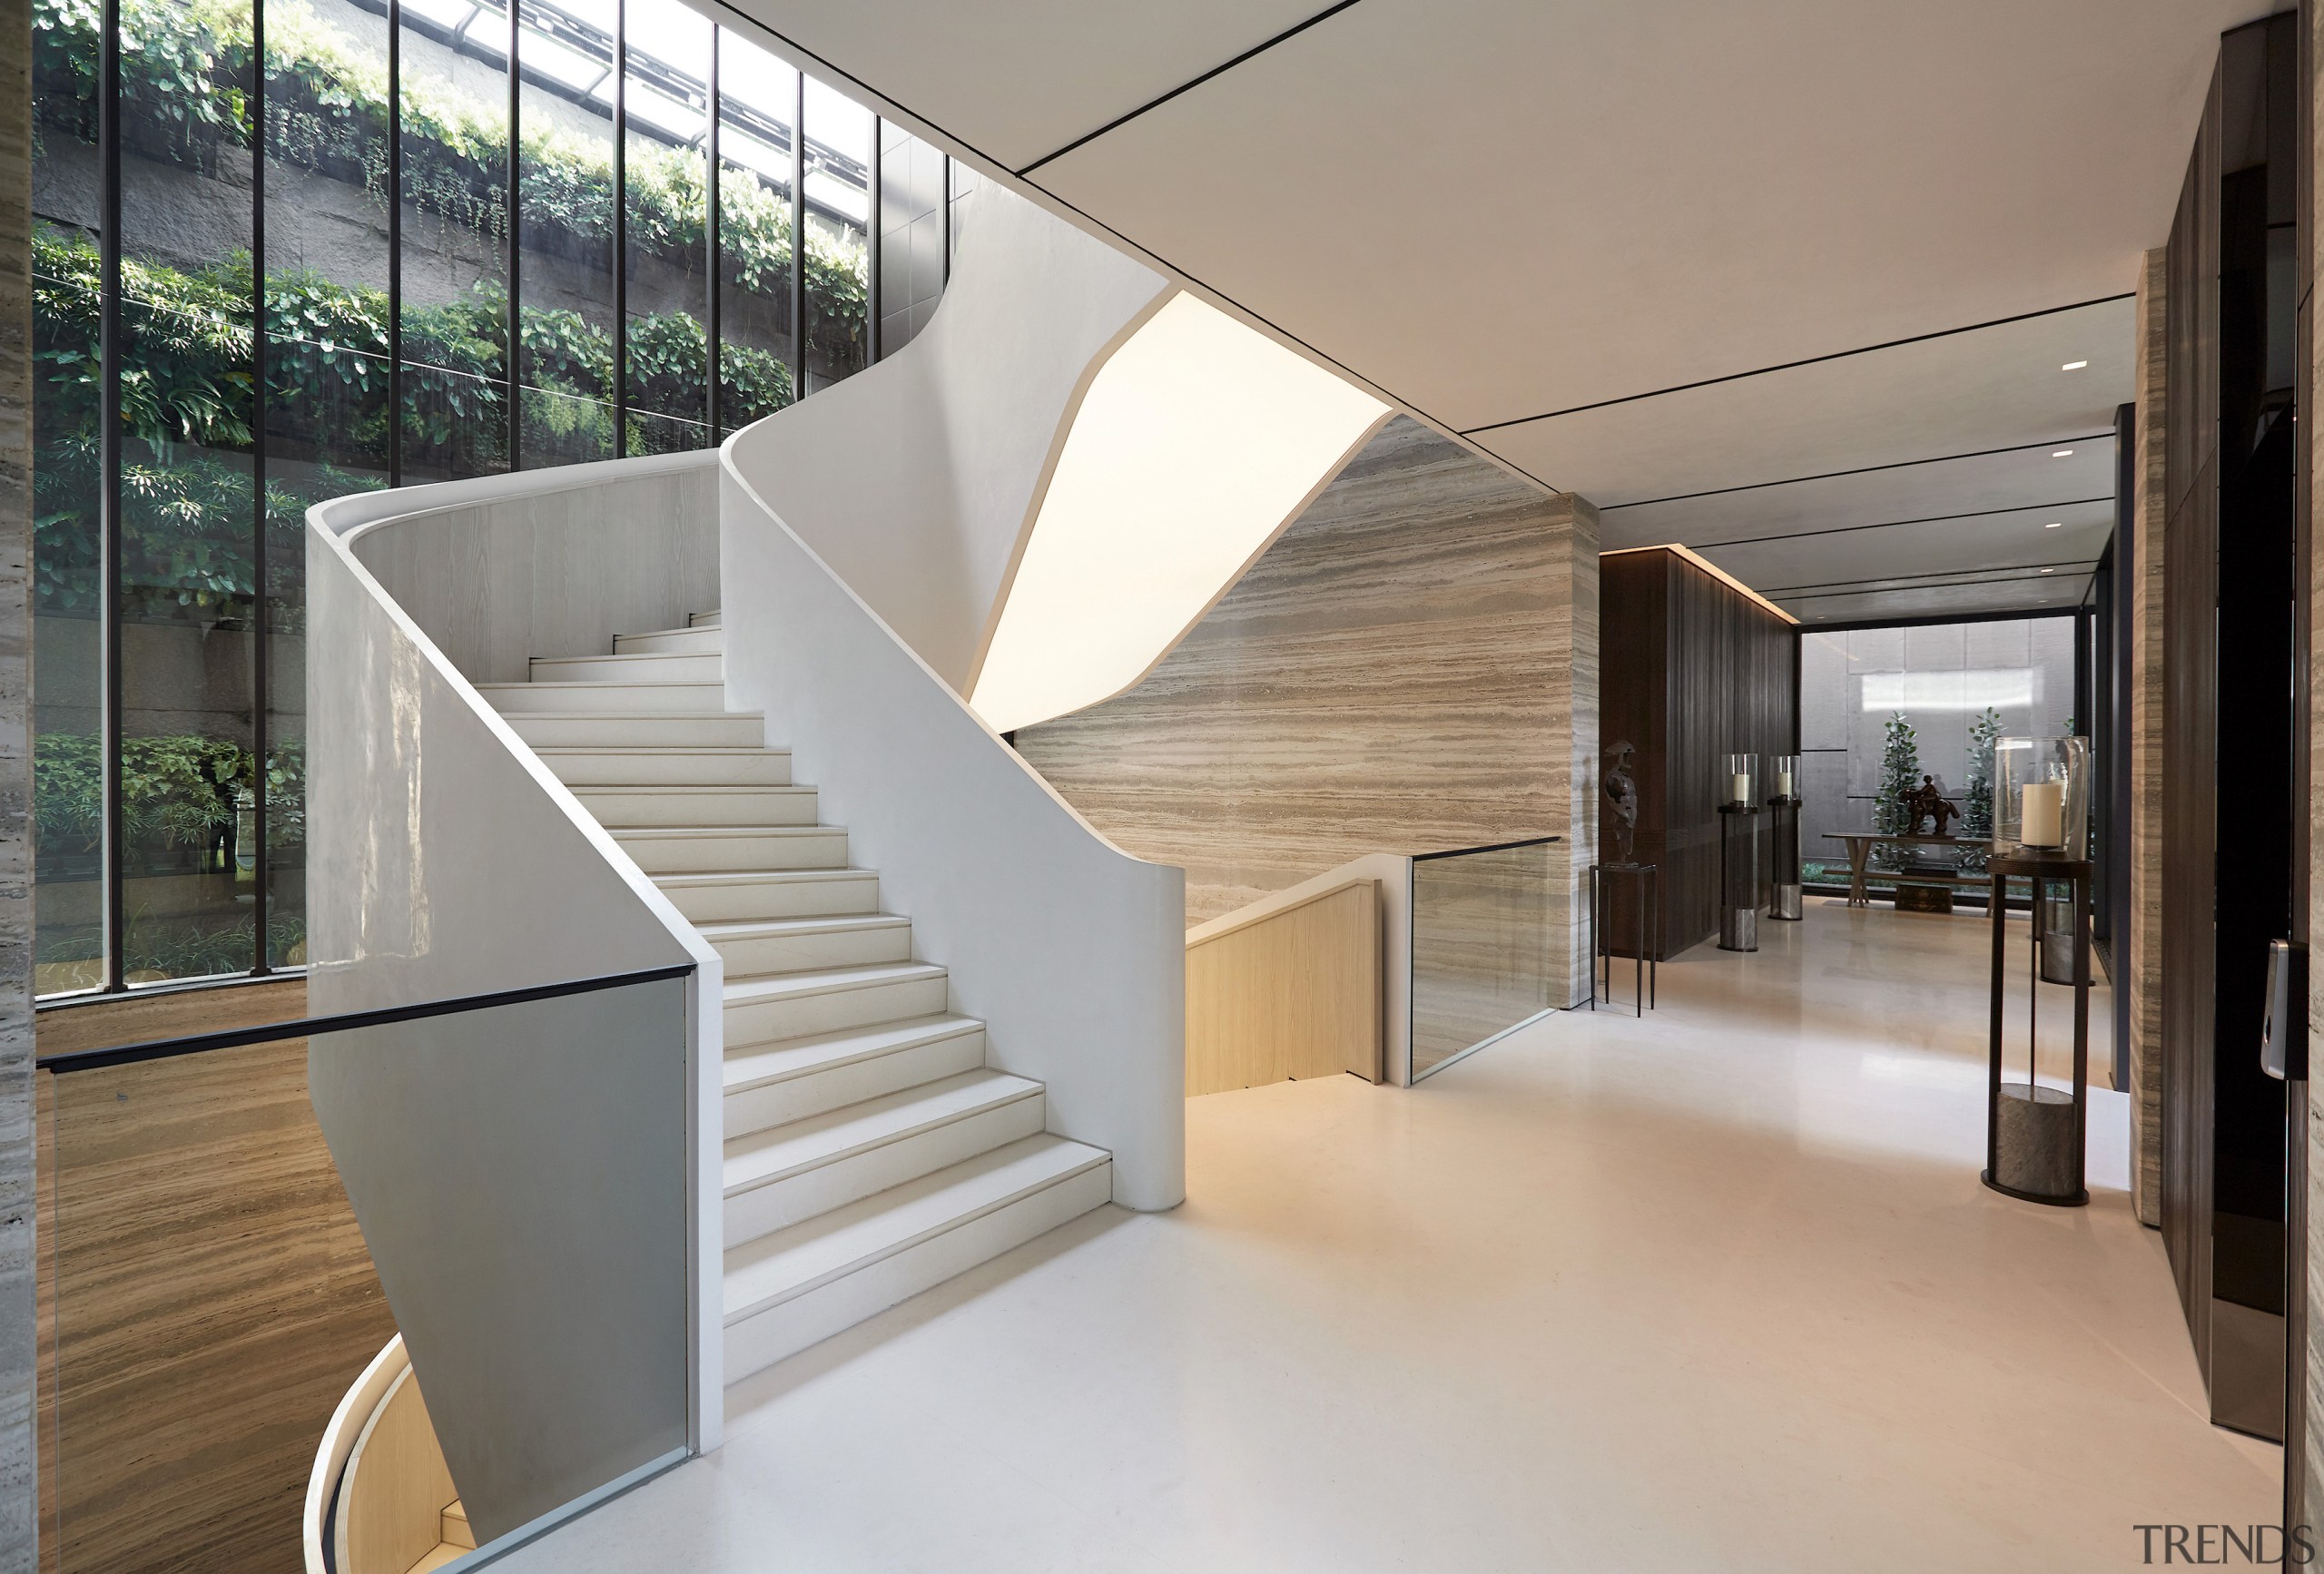 A wall of glass contributes to the staircase 